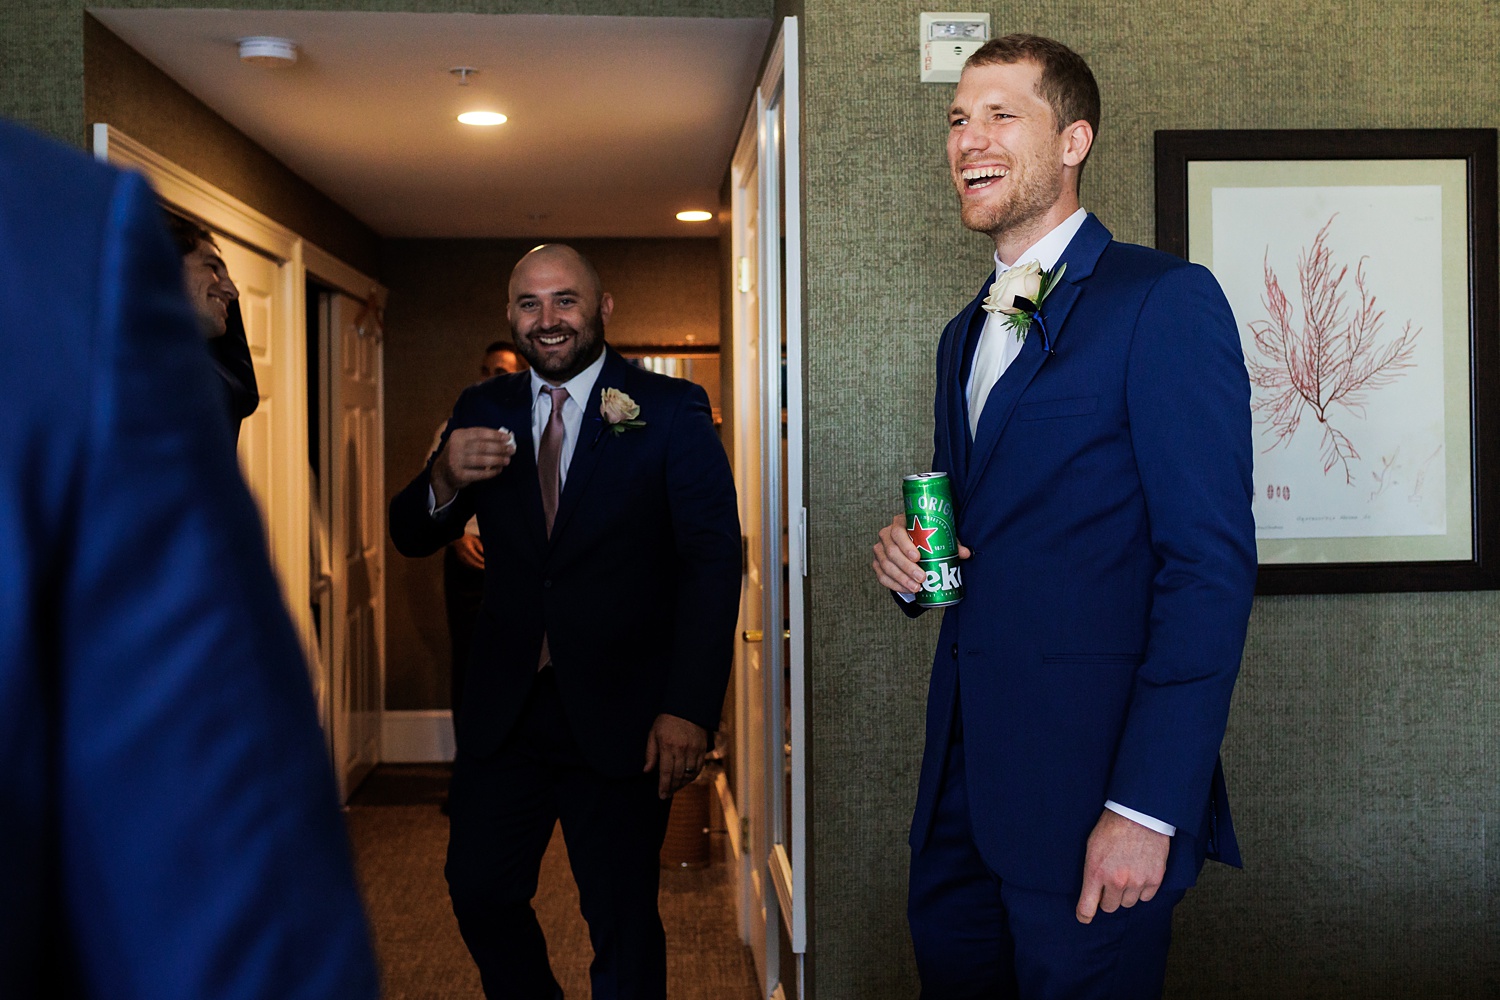 The groom shares a drink with his friends before the wedding starts